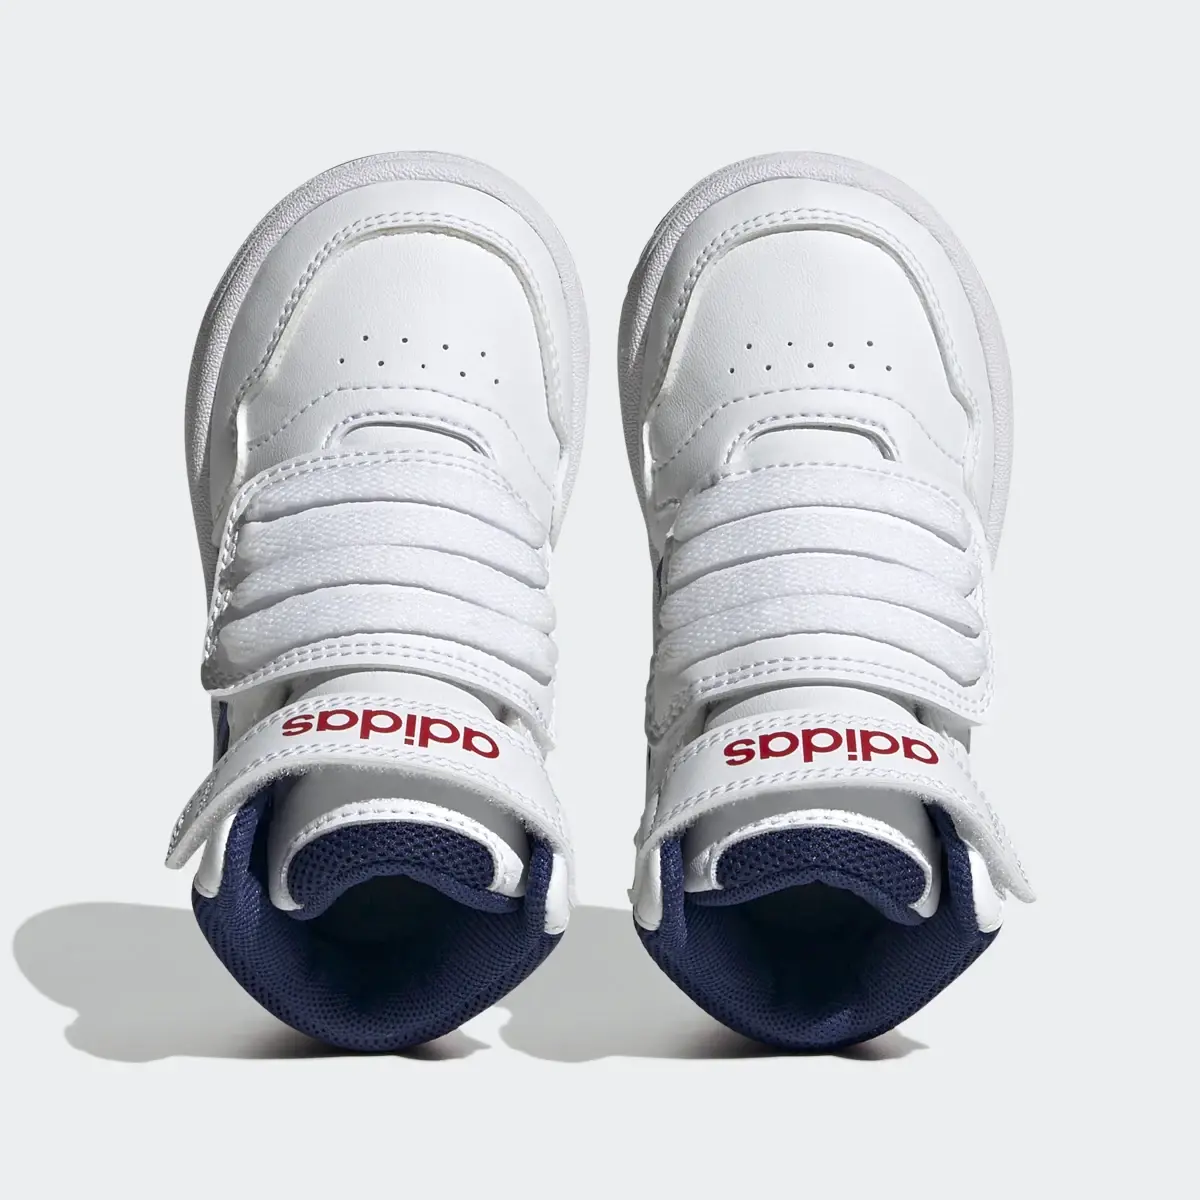 Adidas Hoops Mid Shoes. 3